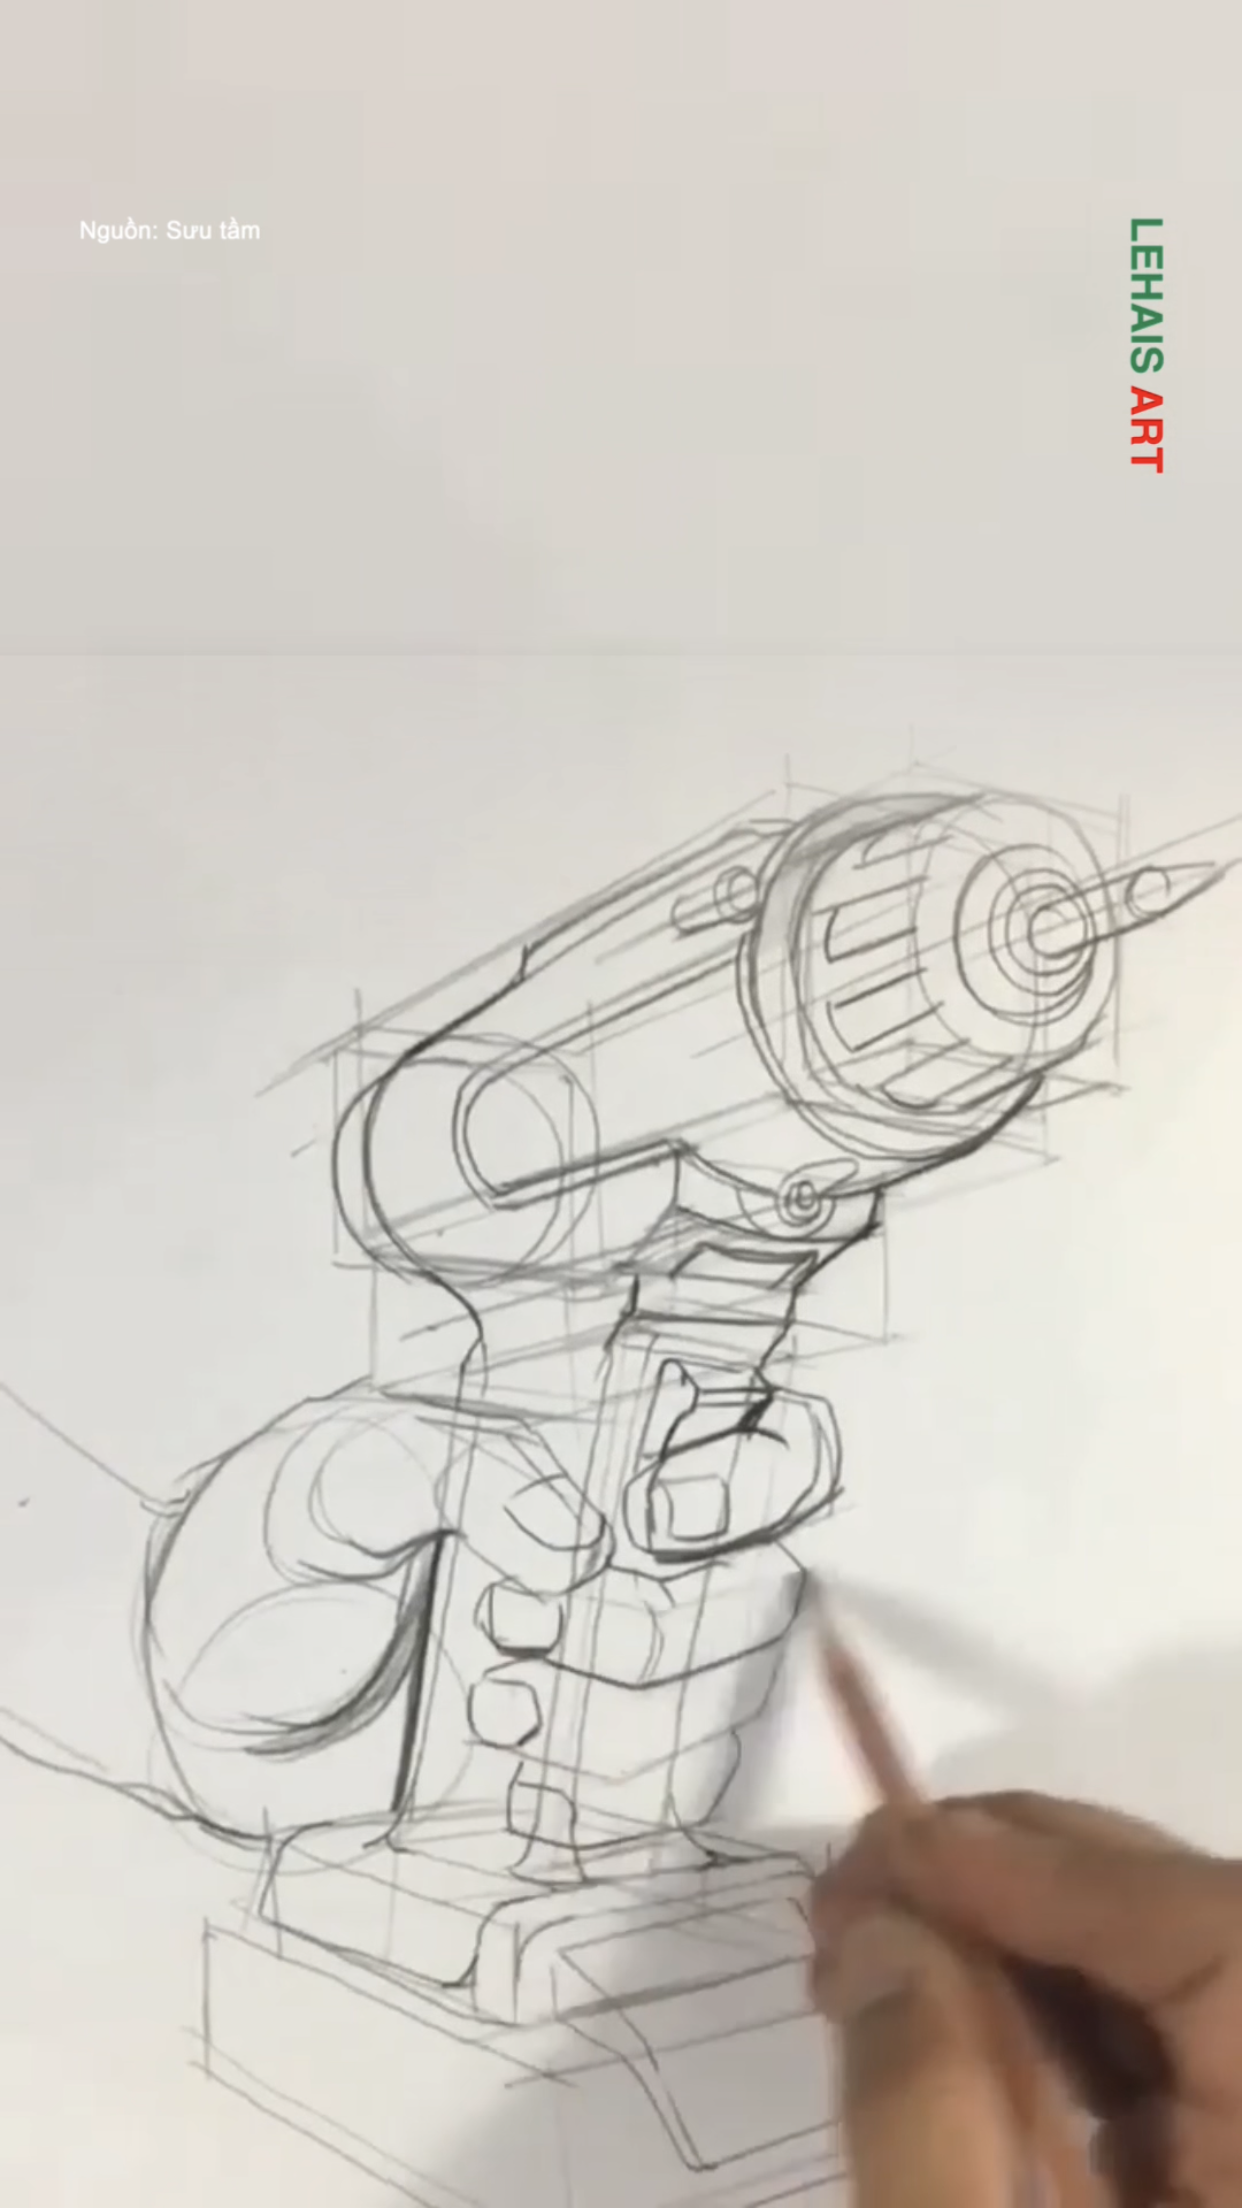 Spatial geometry applied to draw the drill